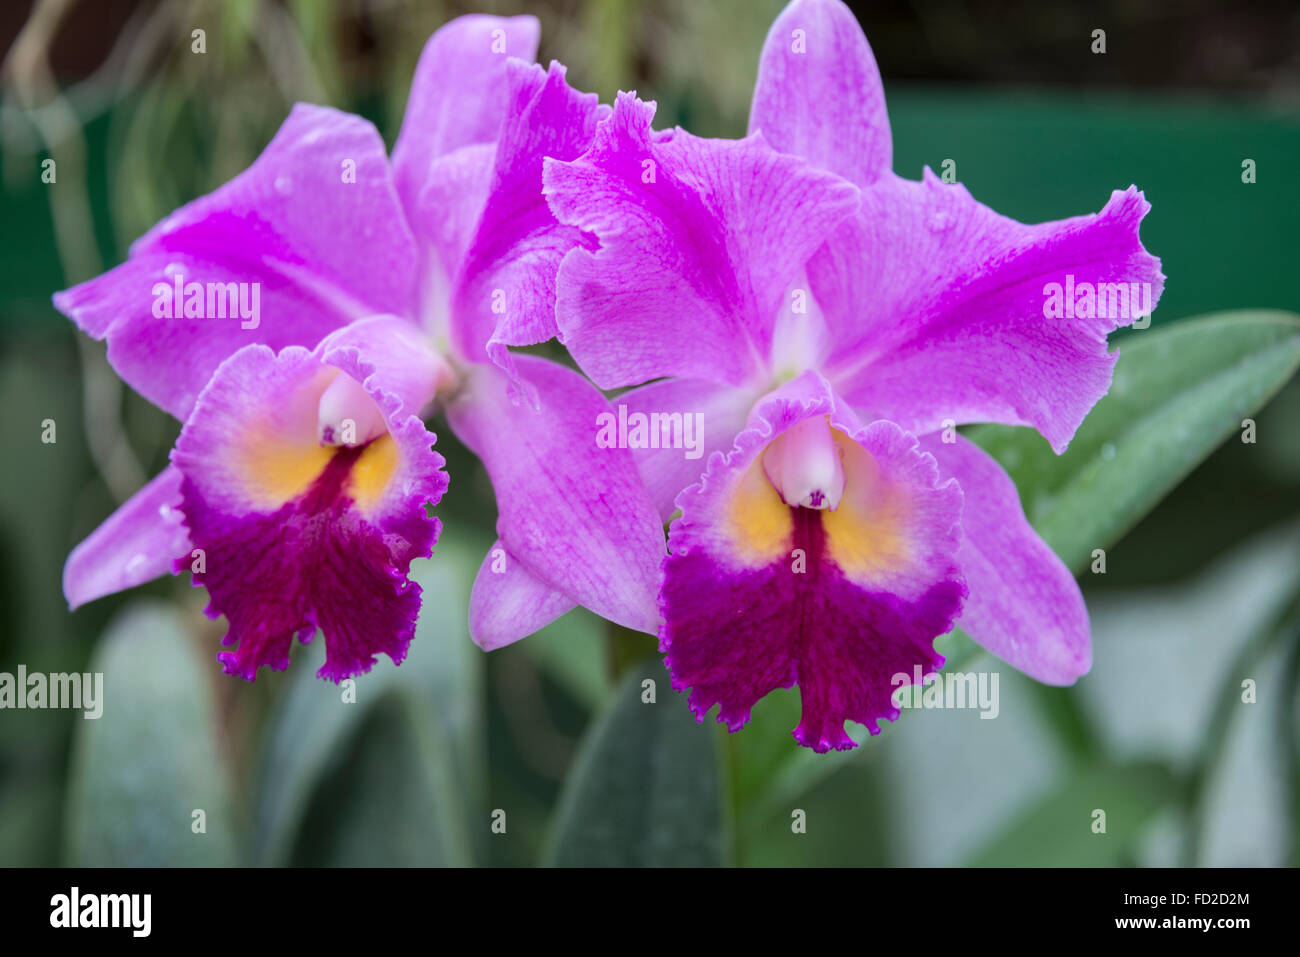 A Cattleya Hybrid orchid on display in the Orchid House in the Peradeniya Botanical Gardens 5.5km west of  Kandy in  Sri Lanka Stock Photo